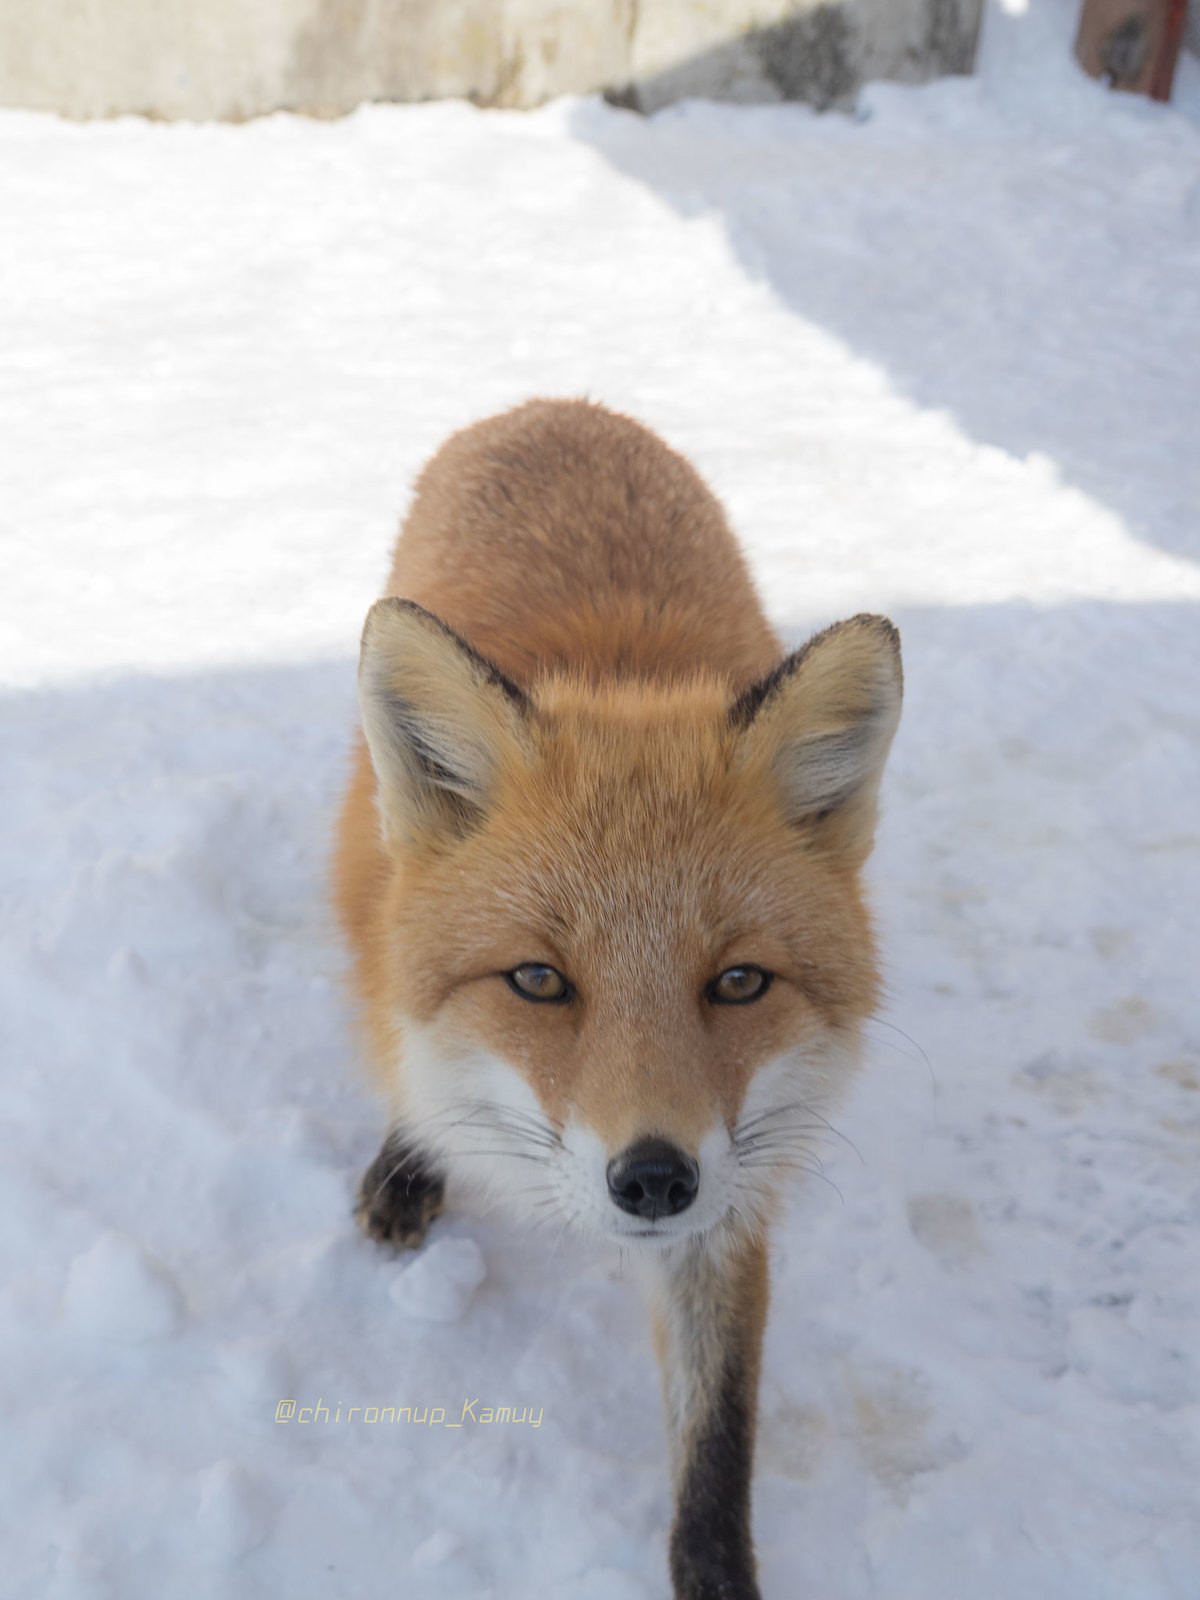 Foxxo approaches u. What u do?. .. give him a pat and maybe a snack.